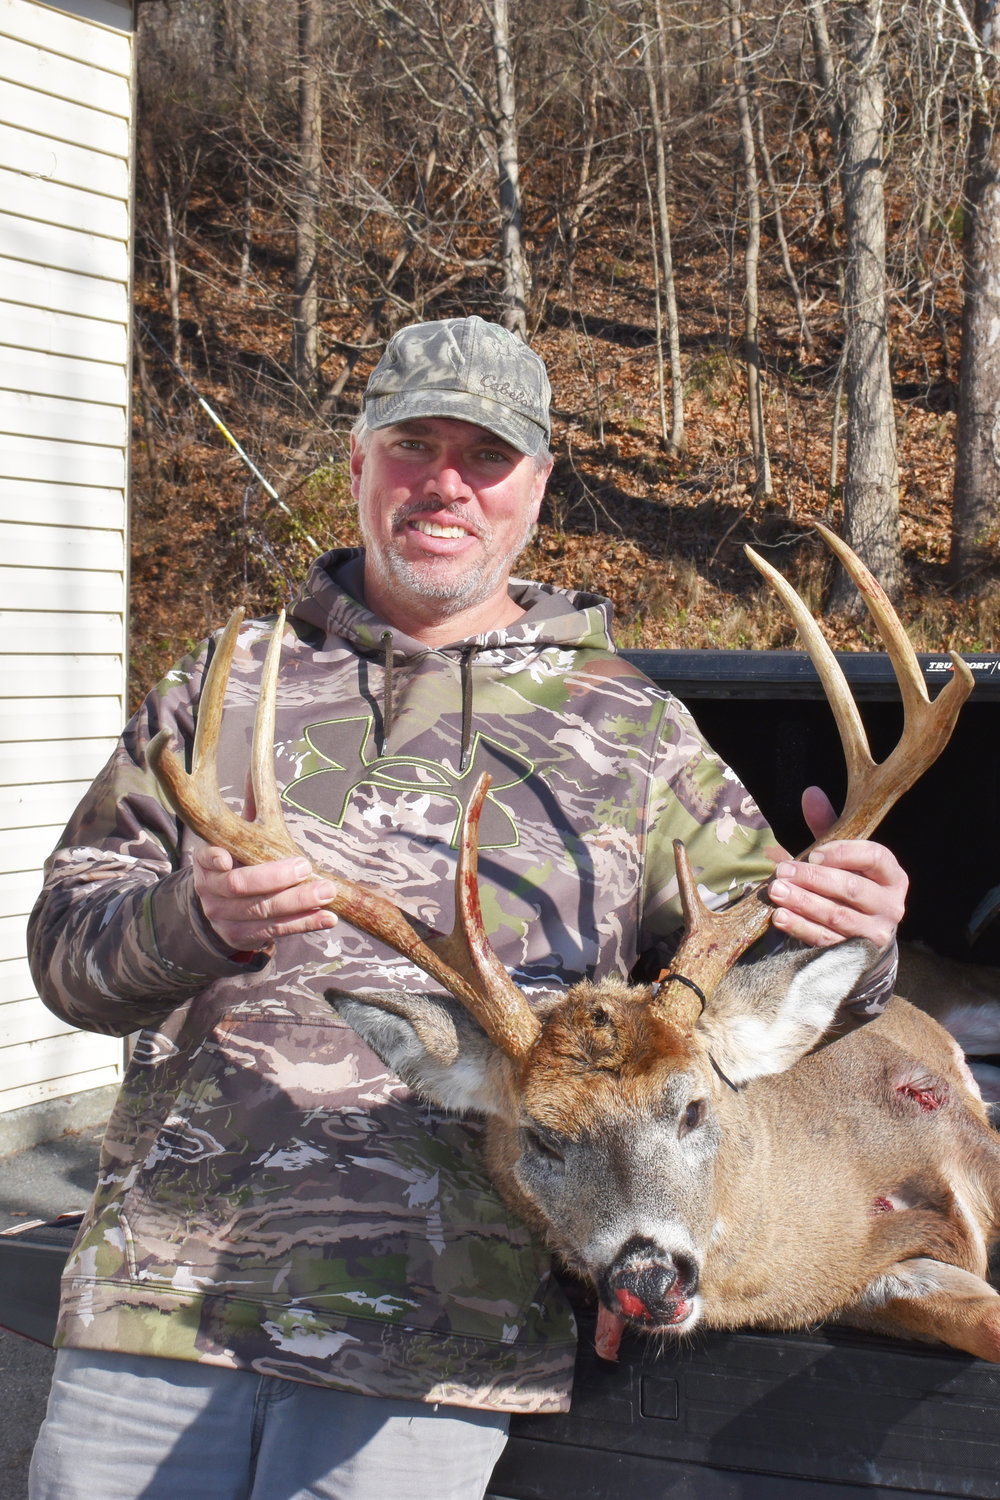 Dave Cross of Liberty won the 49th Annual Sullivan County Democrat Big Buck Contest with this massive 8-pointer he harvested in the Town of Rockland. The buck scored 80.5. The big buck had a left beam of 23 inches, right beam of 25 and a 24.5-inch outside spread. Dave said he took the buck at 60 yards with a 30.06. “I was in the right place at the right time,” Dave said.